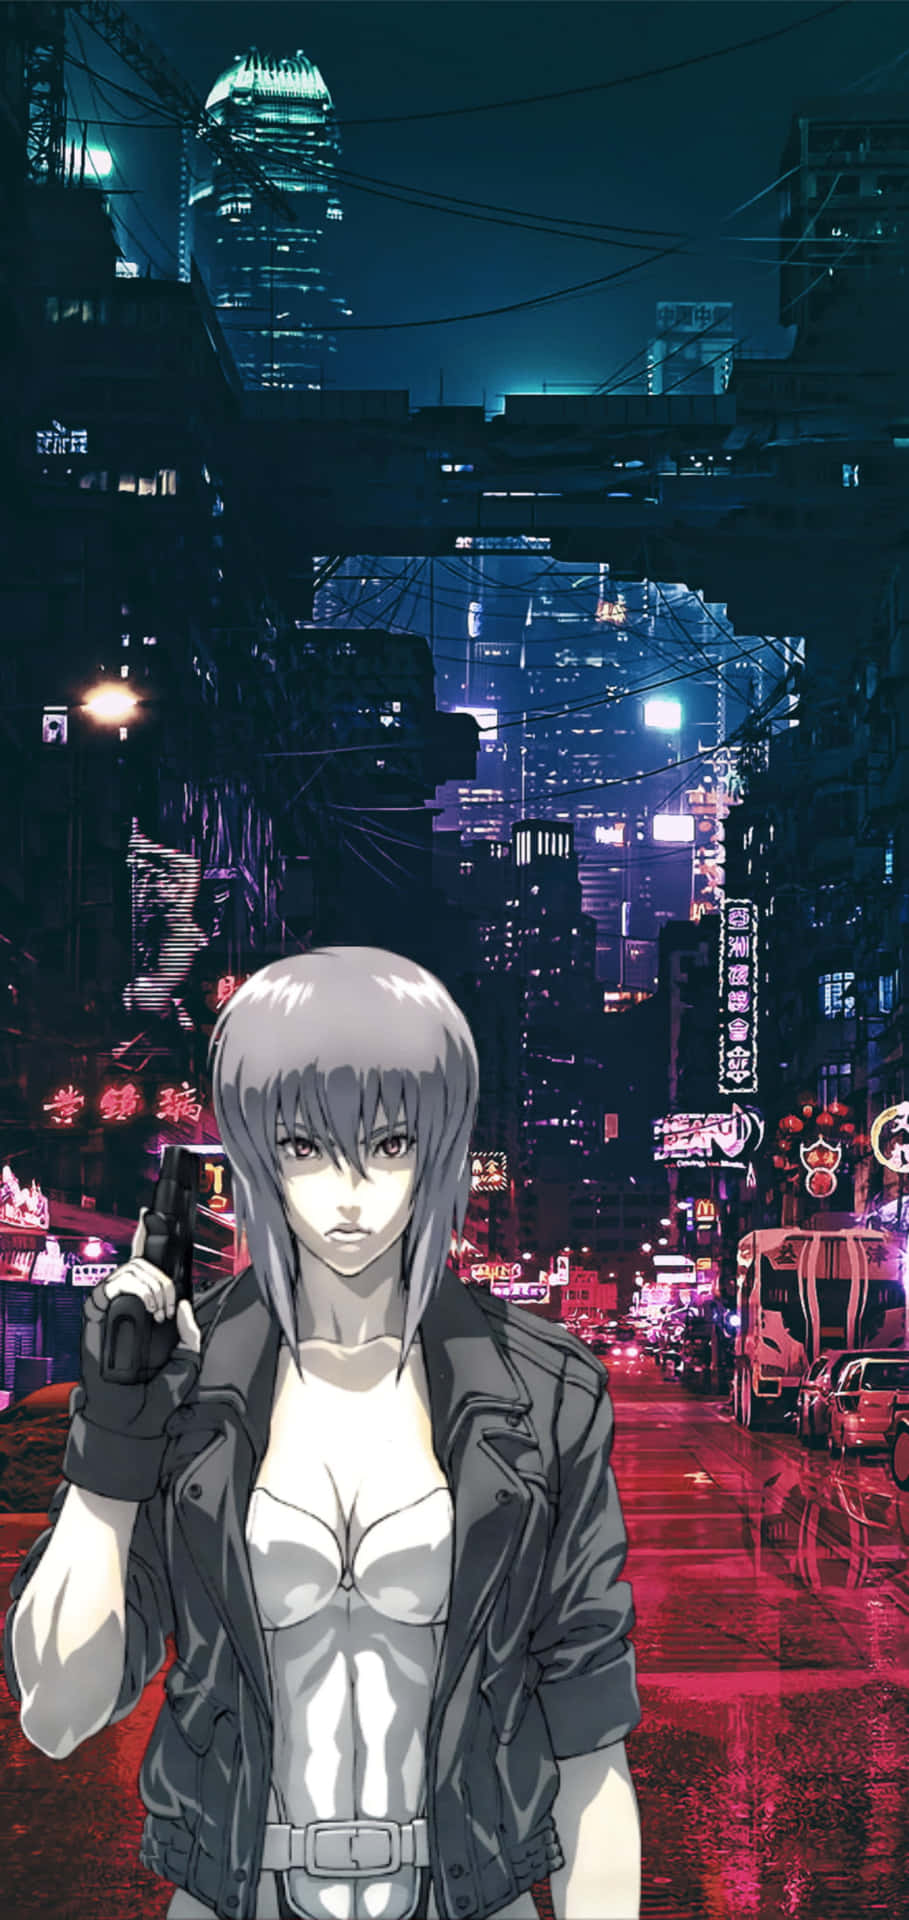 "A look into the world of Ghost In The Shell".